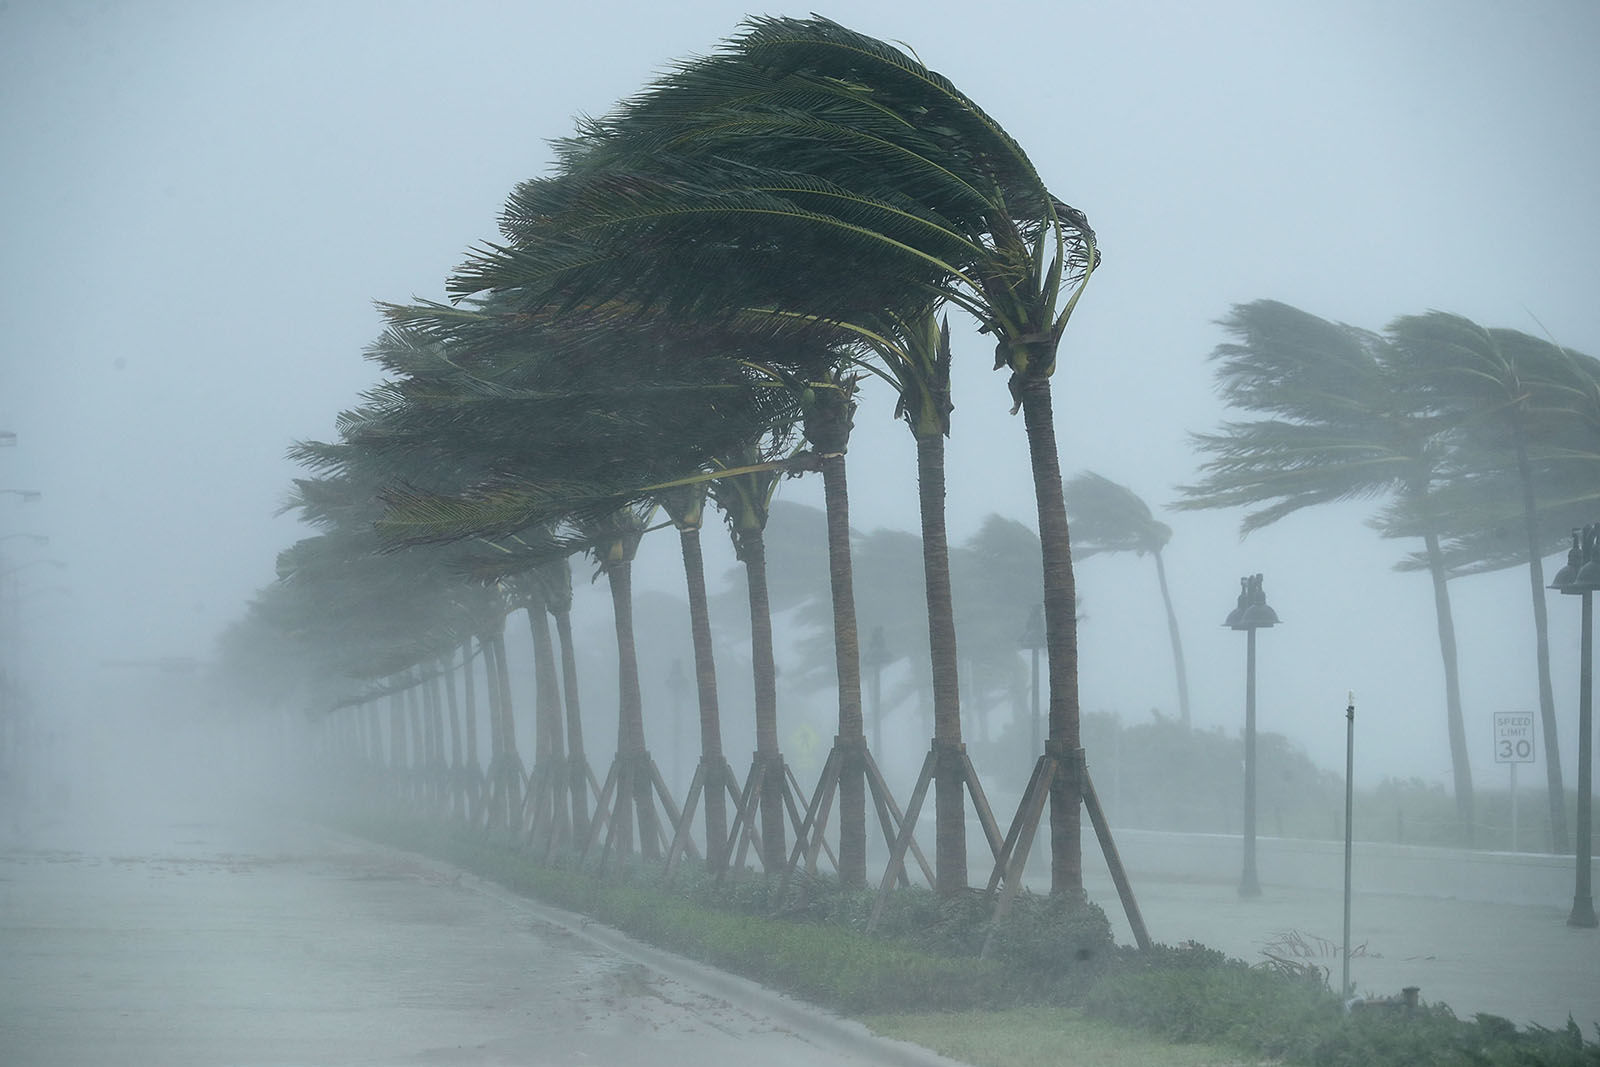 Trees bend in the tropical storm wind along North Fort Lauderdale Beach Boulevard as Hurricane Irma hits the southern part of the state Sept. 10, 2017 in Fort Lauderdale, Florida. The powerful hurricane made landfall in the United States in the Florida Keys at 9:10 a.m. after raking across the north coast of Cuba.  (Photo by Chip Somodevilla/Getty Images)